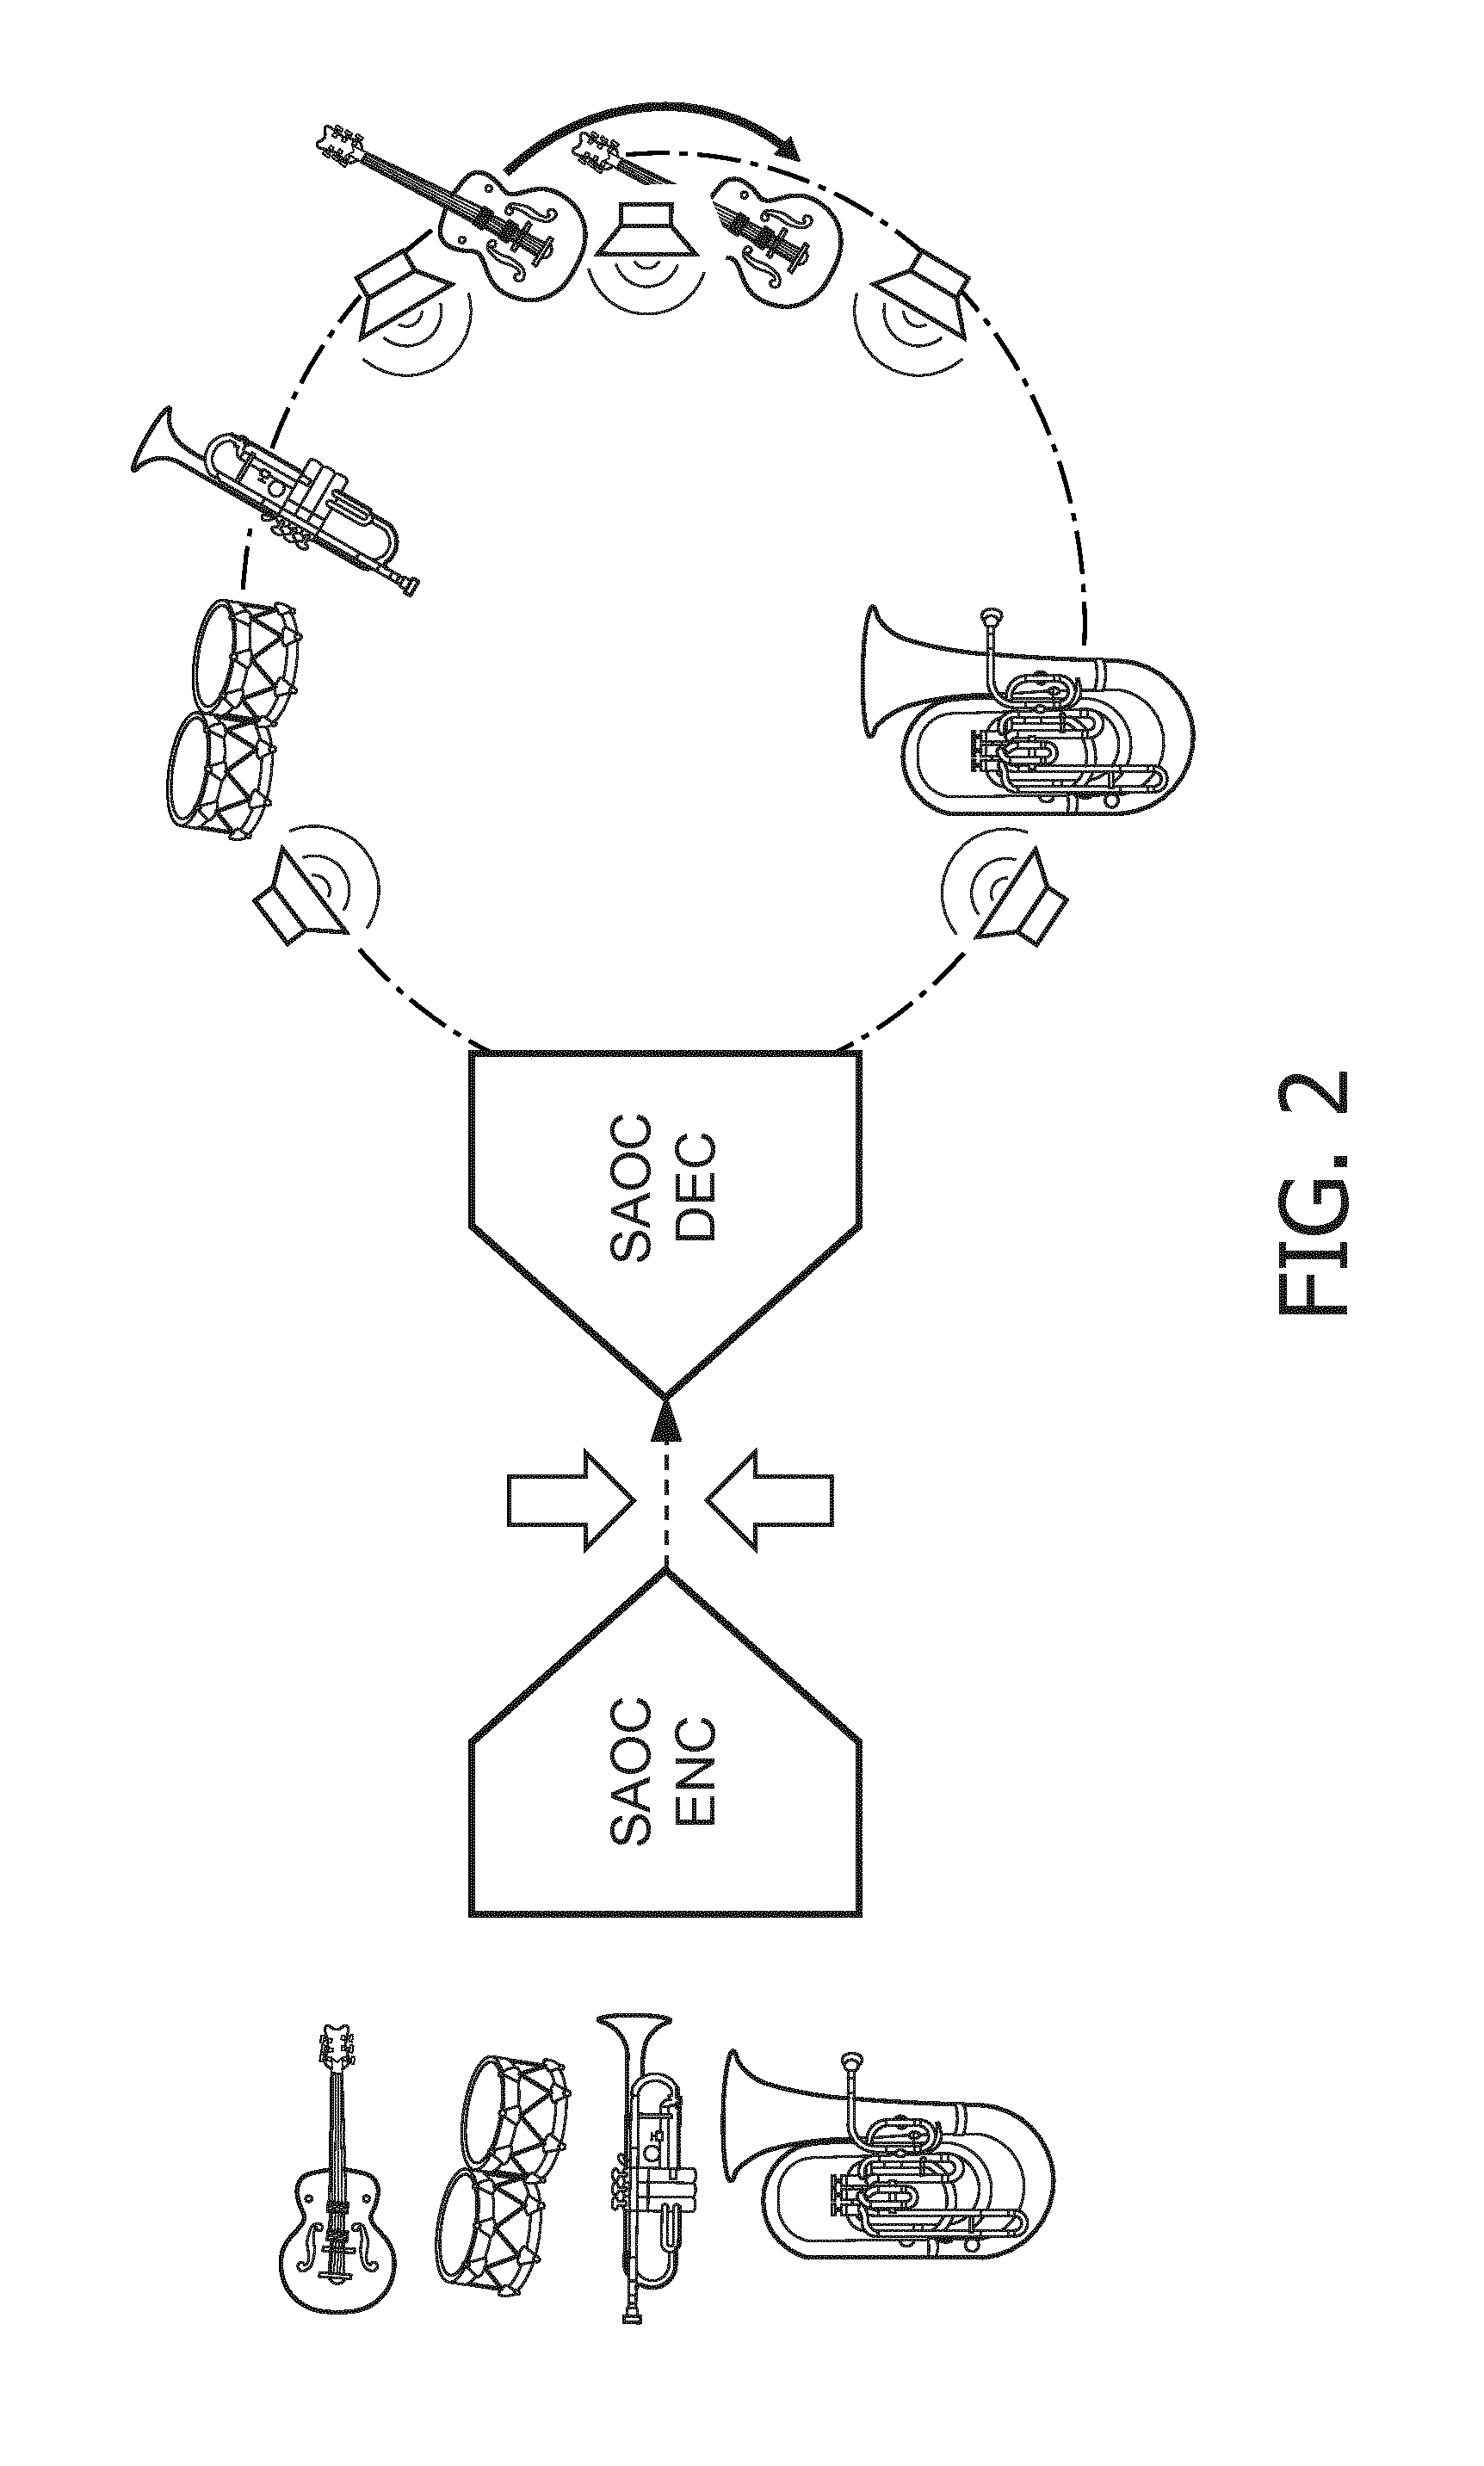 An audio processing apparatus and method therefor